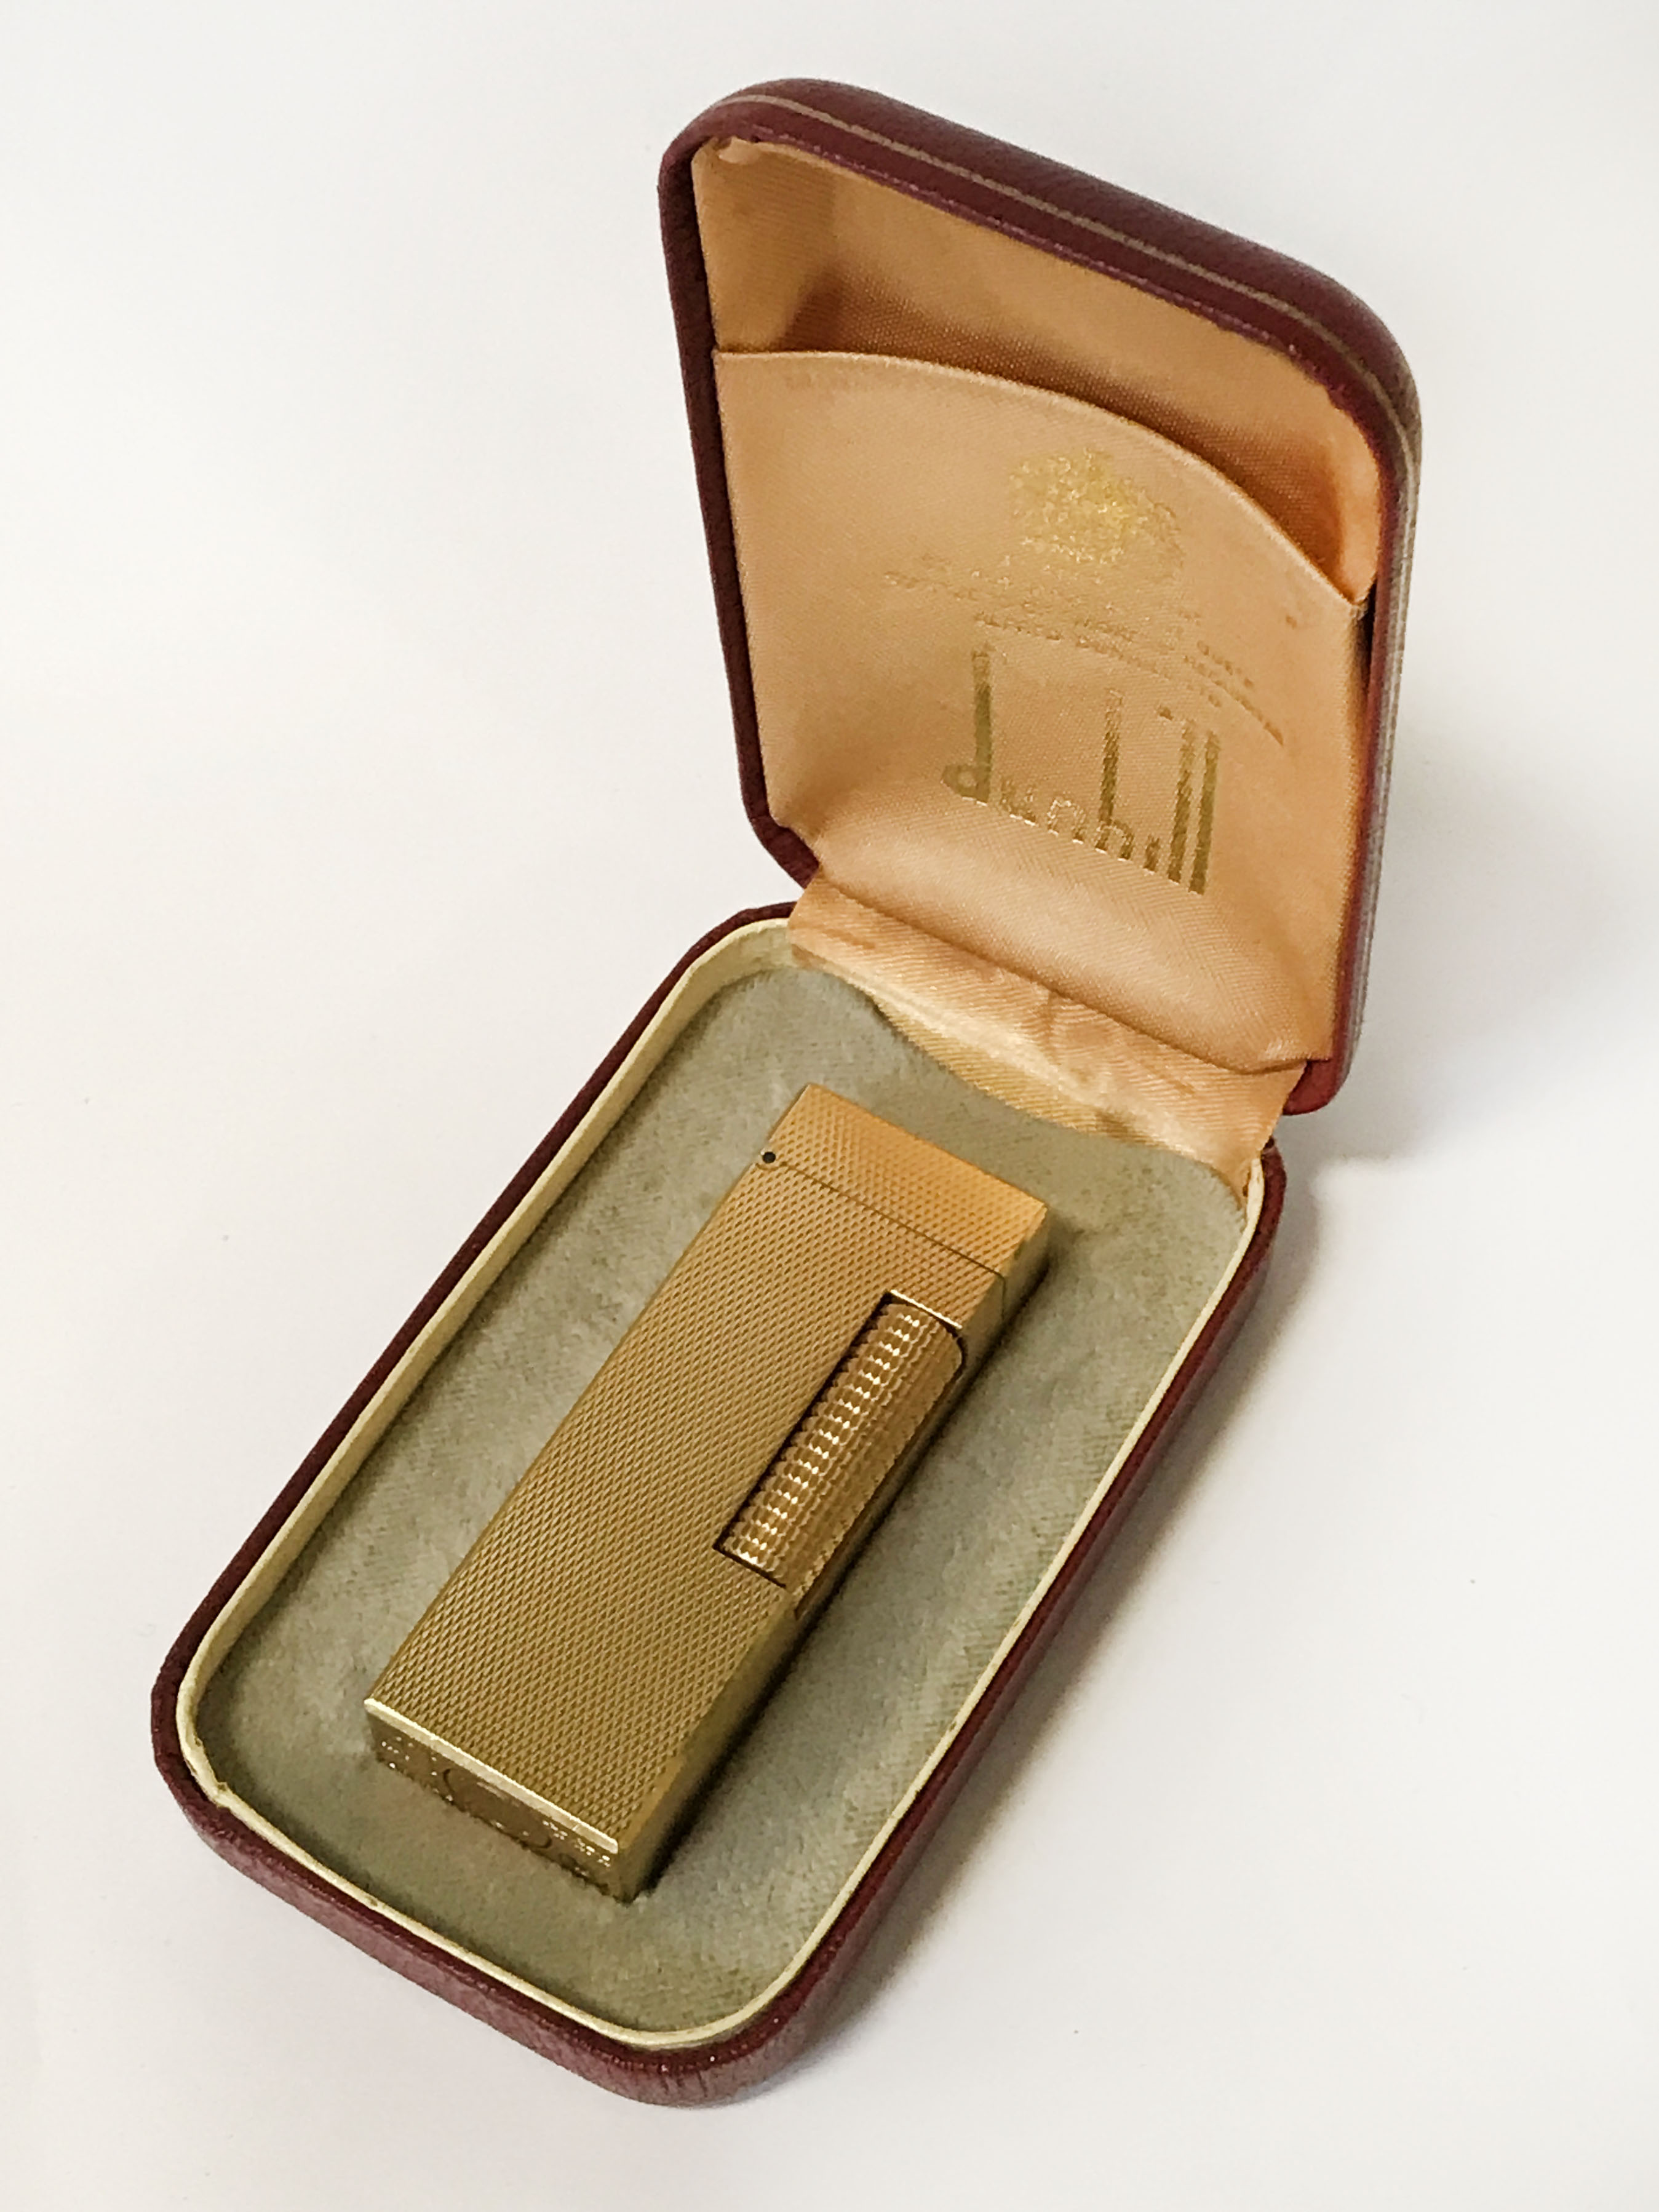 BOXED DUNHILL LIGHTER